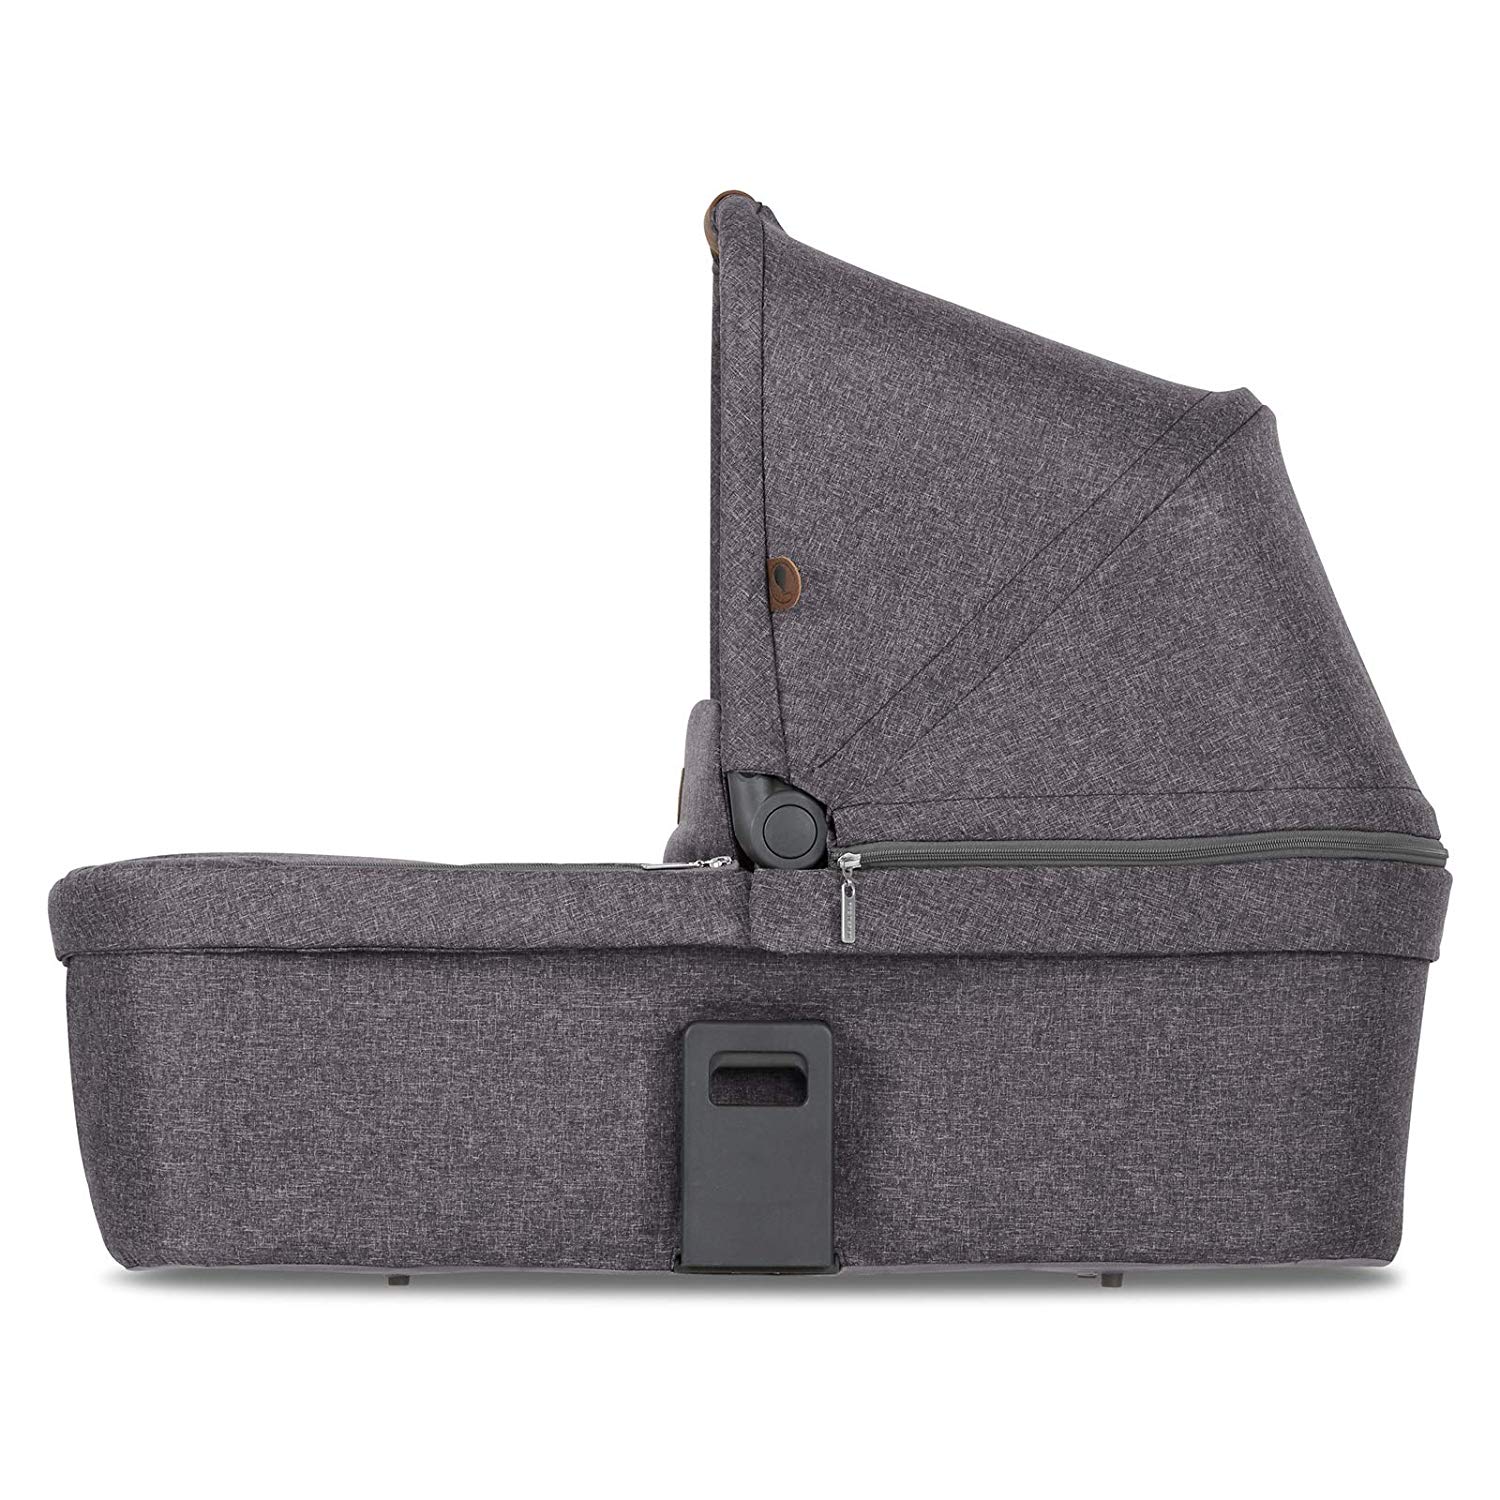 ABC Design Zoom Baby Carrycot - Foldable Carry Cot - for Babies and Newborns - Compatible with Zoom Siblings - Colour: Street